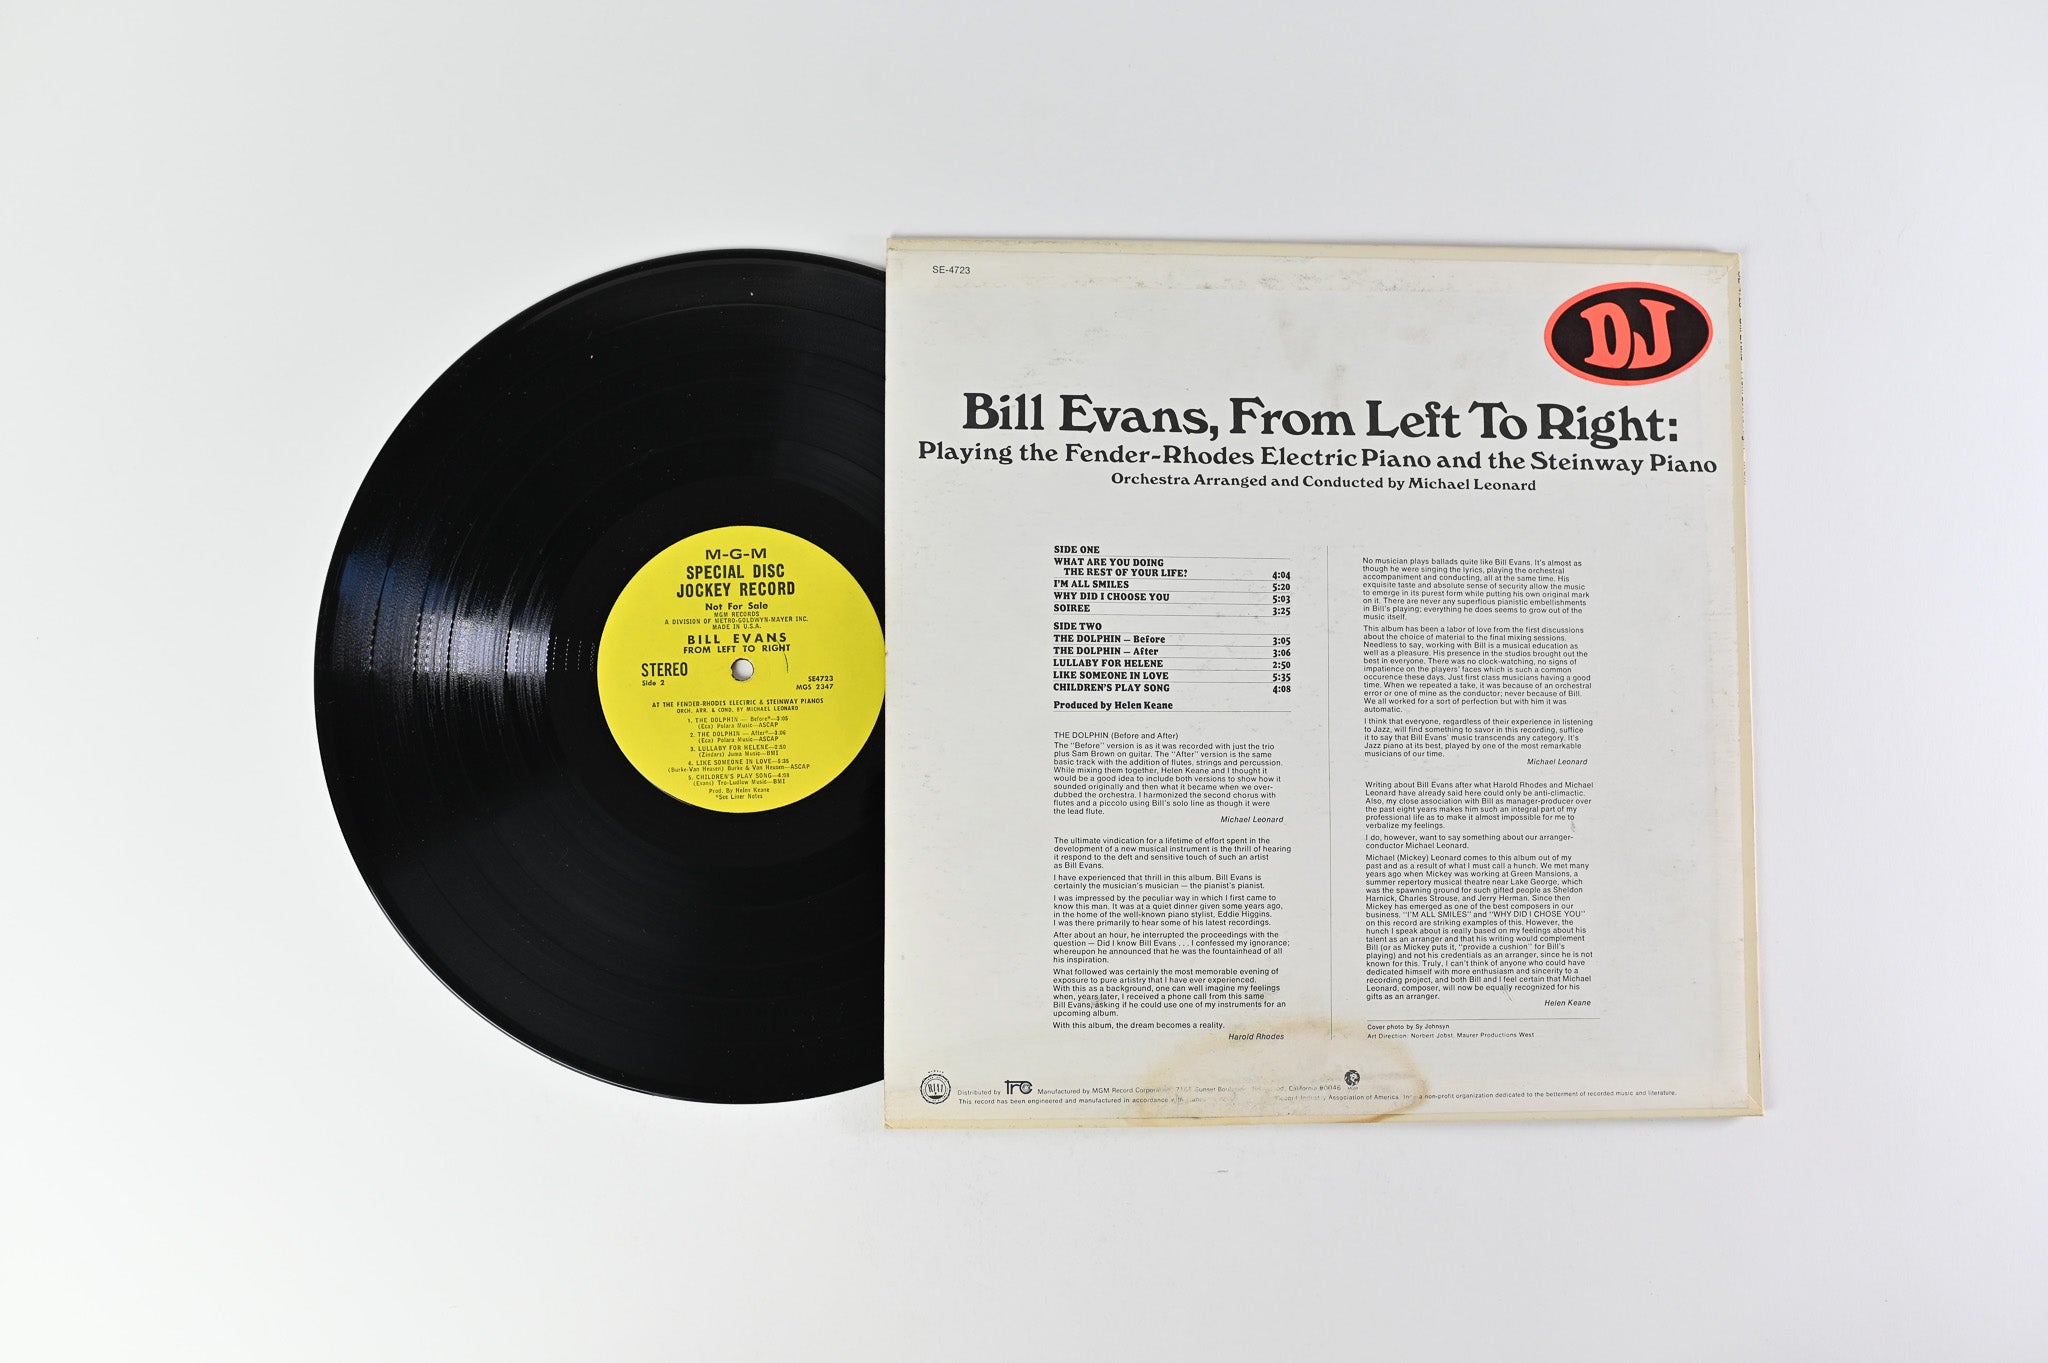 Bill Evans - From Left To Right on MGM Stereo Promo